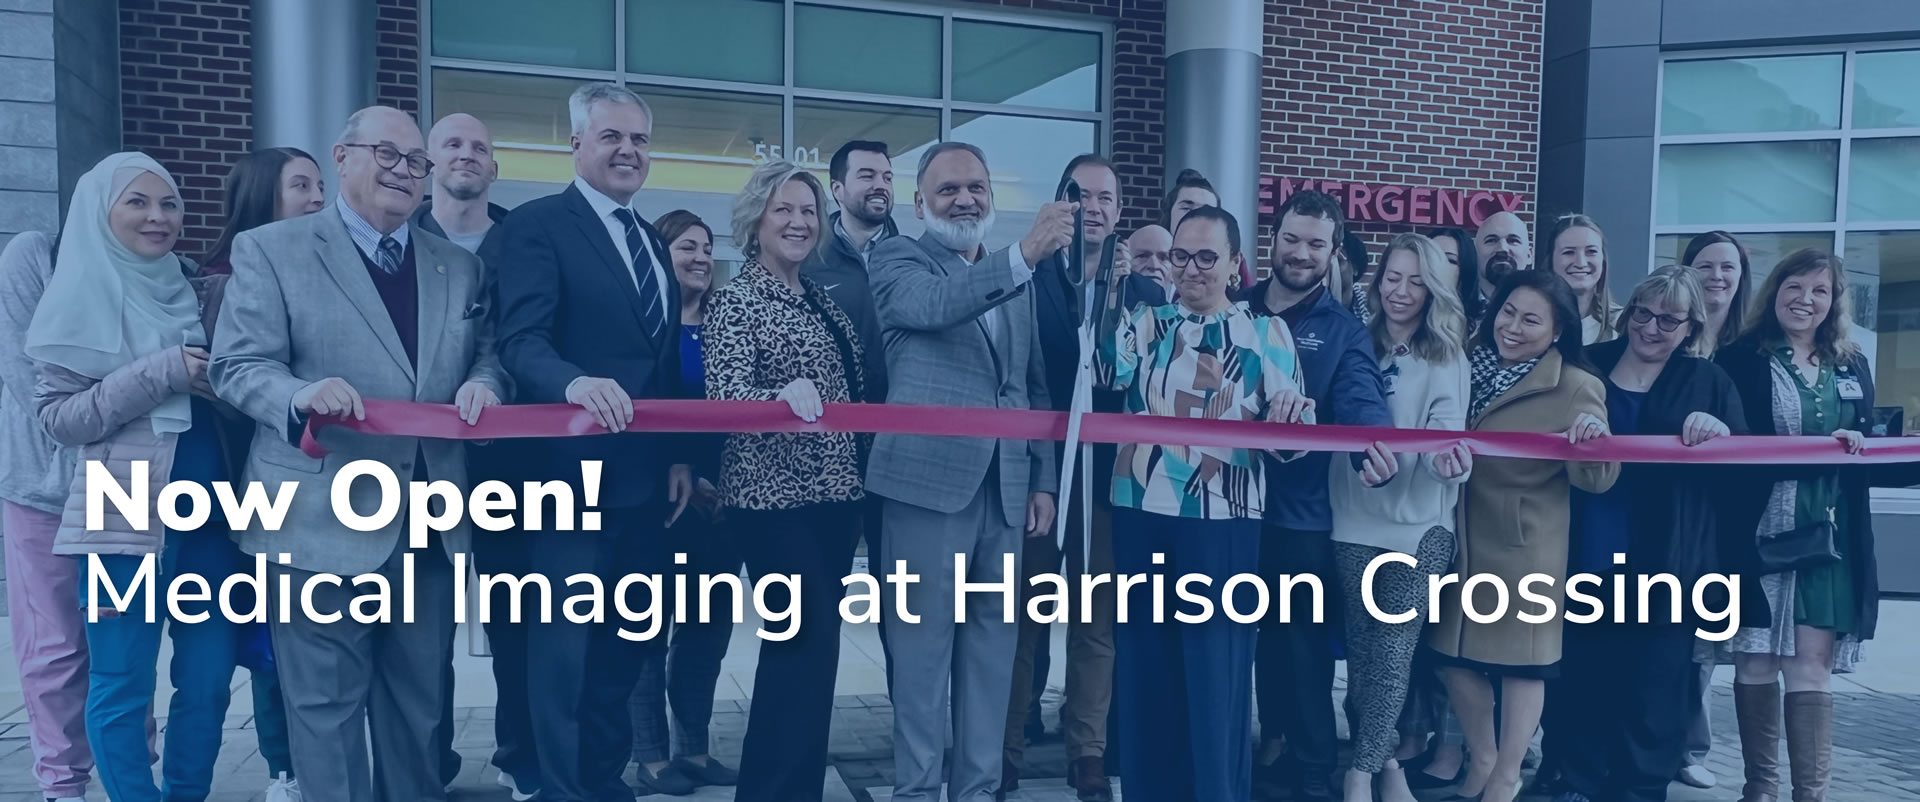 Now Open! Medical Imaging at Harrison Crossing